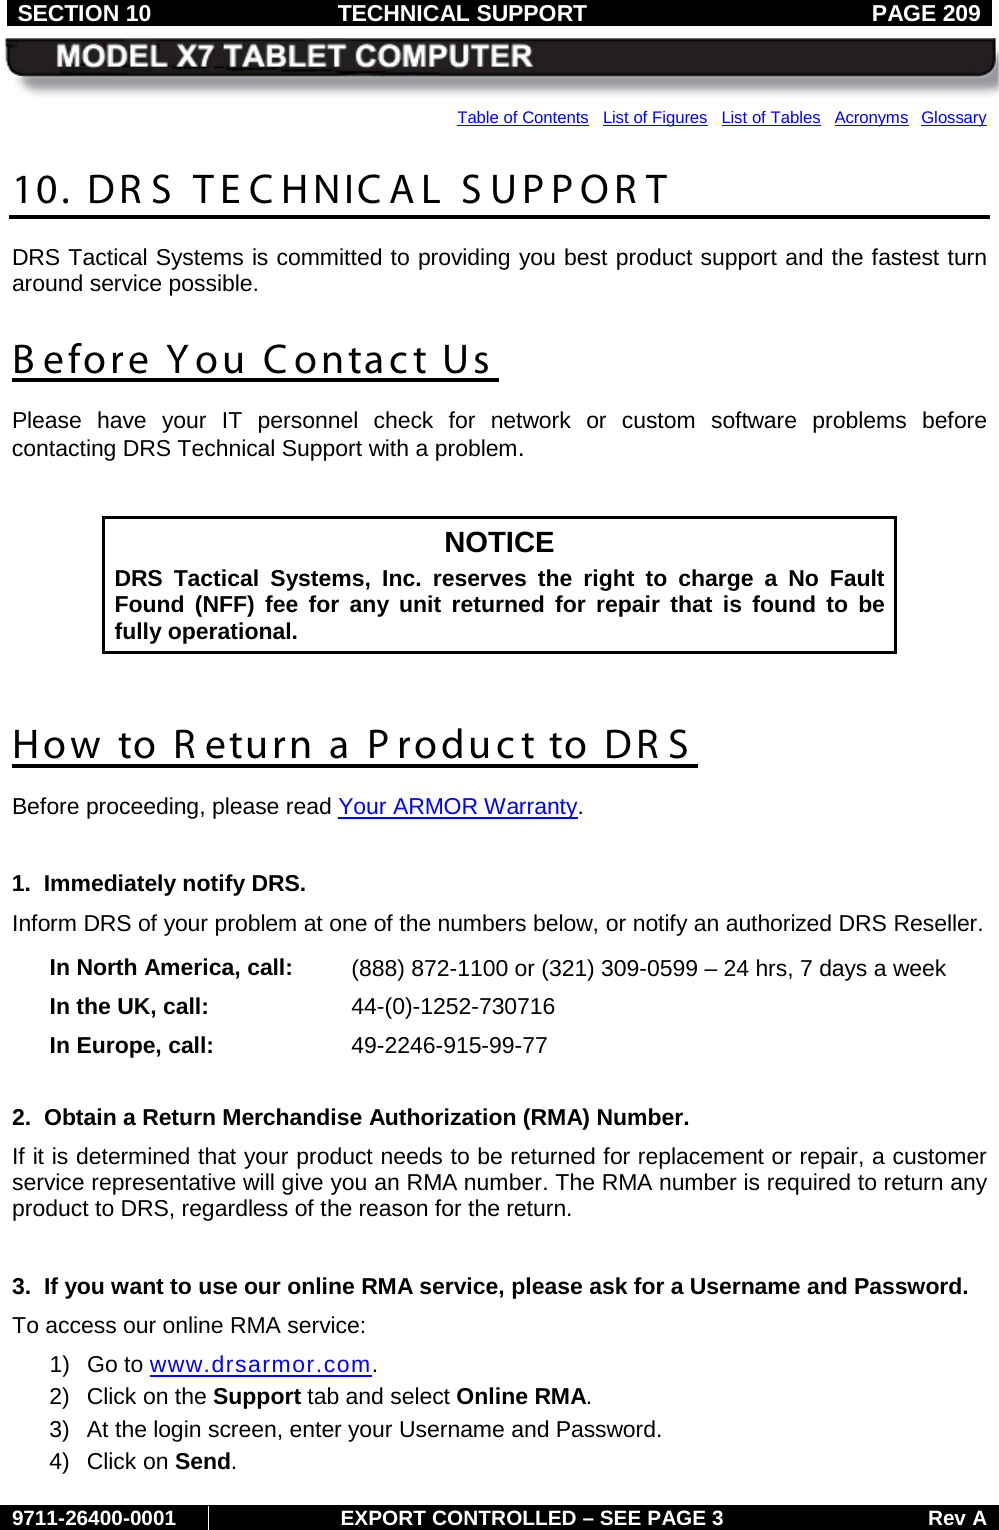 SECTION 10 TECHNICAL SUPPORT  PAGE 209     9711-26400-0001 EXPORT CONTROLLED – SEE PAGE 3 Rev A Table of Contents   List of Figures   List of Tables   Acronyms  Glossary 10. DR S  TECHNICAL SUPPORT DRS Tactical Systems is committed to providing you best product support and the fastest turn around service possible. B efore You C ontact Us  Please  have your IT personnel check for network or custom software problems before contacting DRS Technical Support with a problem.   NOTICE DRS Tactical Systems, Inc. reserves the right to charge a No Fault Found (NFF) fee for any unit returned for repair that is found to be fully operational.  How to R eturn a Product to DR S Before proceeding, please read Your ARMOR Warranty.  1.  Immediately notify DRS. Inform DRS of your problem at one of the numbers below, or notify an authorized DRS Reseller.  In North America, call: (888) 872-1100 or (321) 309-0599 – 24 hrs, 7 days a week In the UK, call: 44-(0)-1252-730716 In Europe, call: 49-2246-915-99-77      2.  Obtain a Return Merchandise Authorization (RMA) Number. If it is determined that your product needs to be returned for replacement or repair, a customer service representative will give you an RMA number. The RMA number is required to return any product to DRS, regardless of the reason for the return.   3.  If you want to use our online RMA service, please ask for a Username and Password. To access our online RMA service: 1) Go to www.drsarmor.com. 2) Click on the Support tab and select Online RMA. 3) At the login screen, enter your Username and Password. 4) Click on Send. 